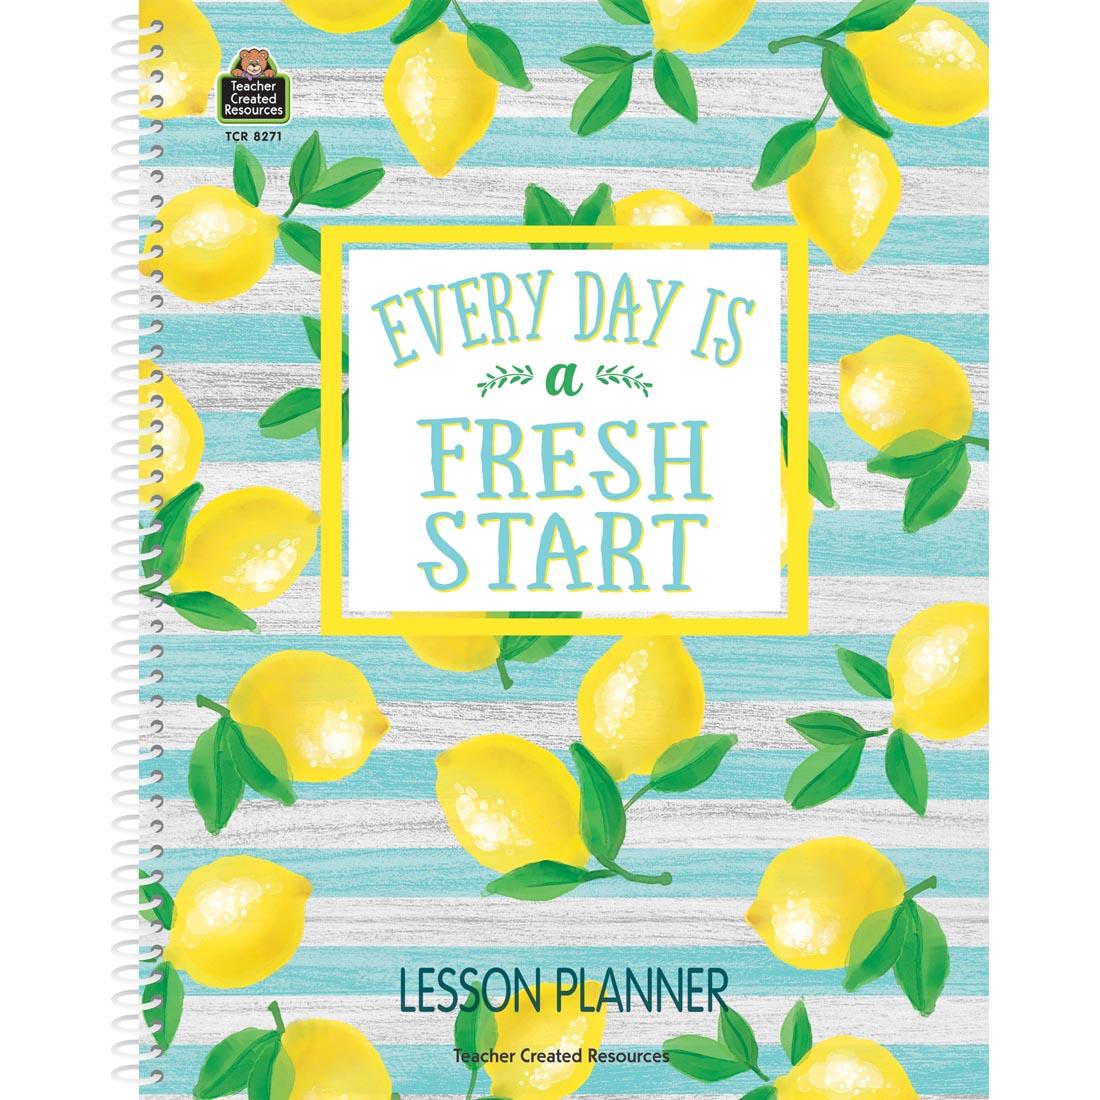 Lesson Planner from the Lemon Zest collection by Teacher Created Resources reads Every Day is a Fresh Start